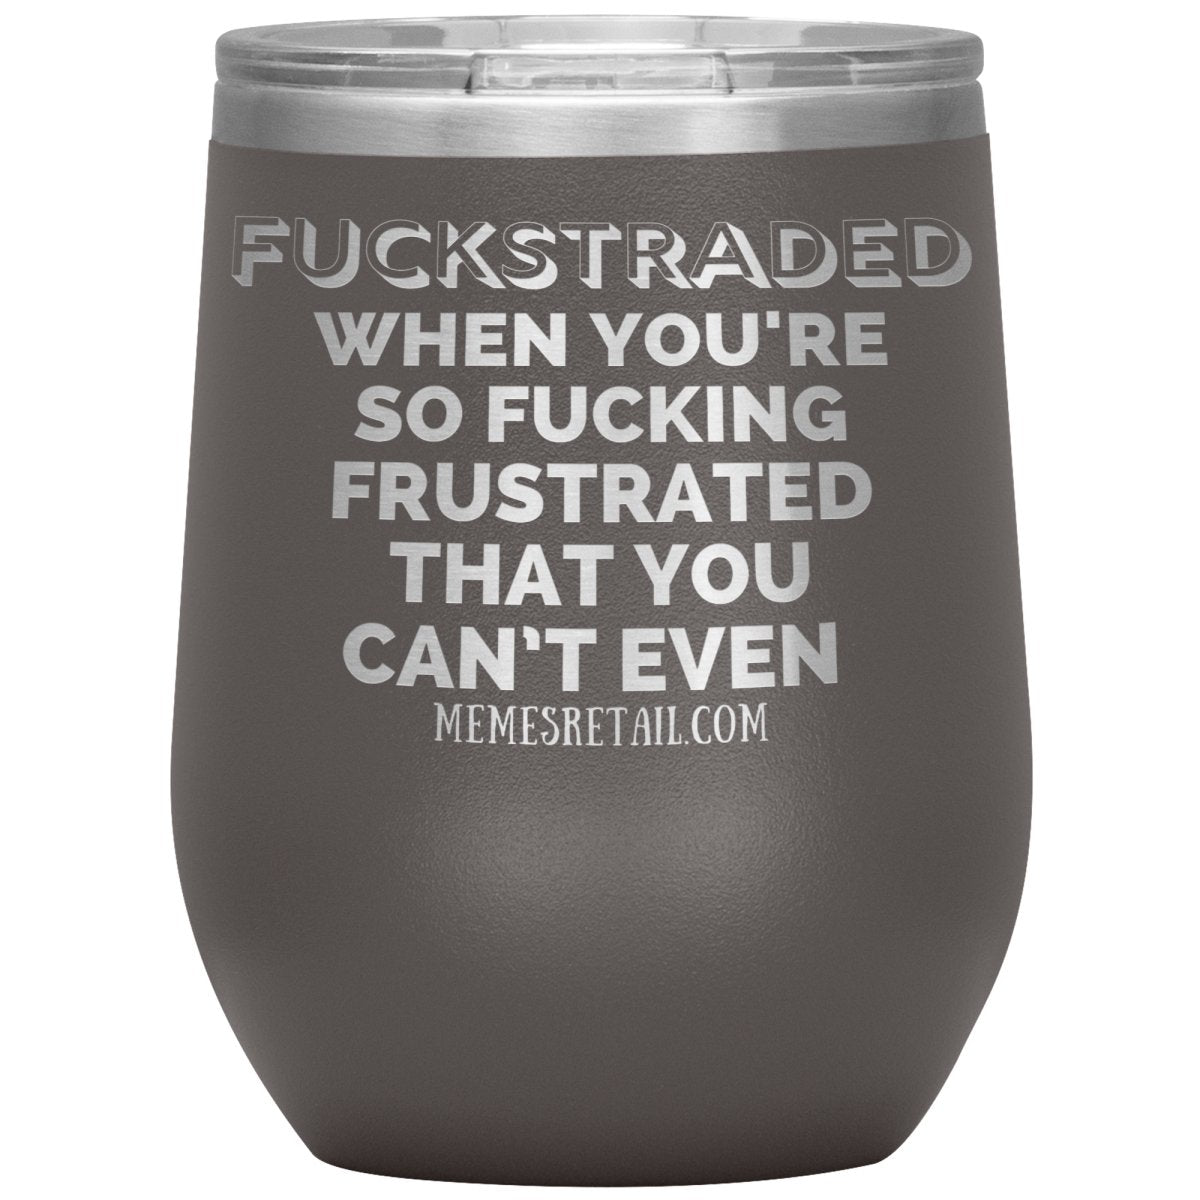 Fuckstraded, When You're So Fucking Frustrated That You Can’t Even Tumblers, 12oz Wine Insulated Tumbler / Pewter - MemesRetail.com